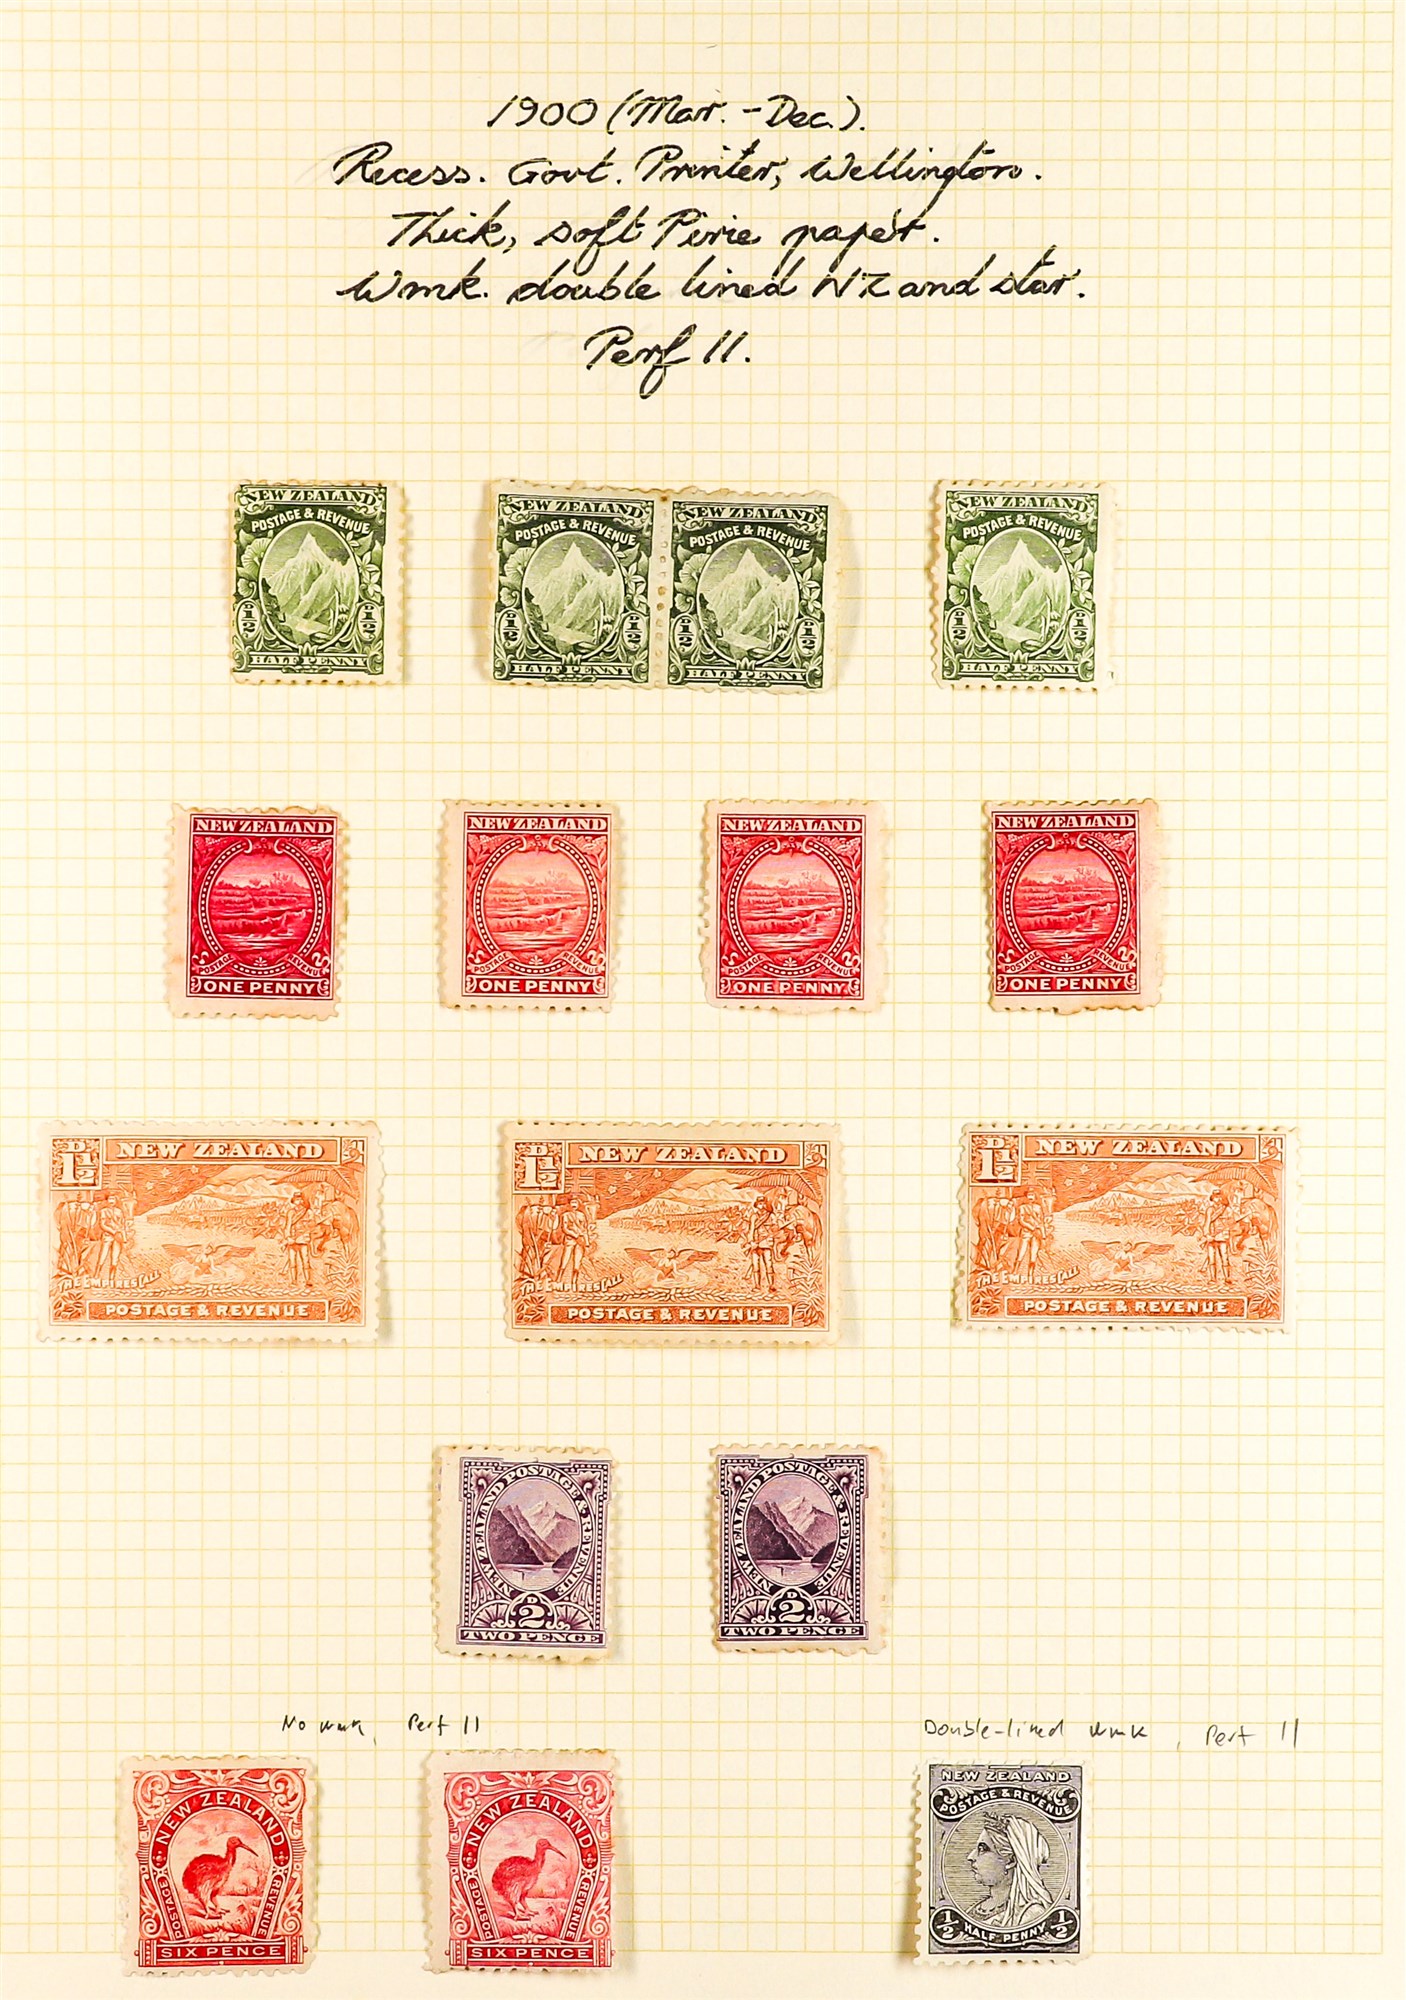 NEW ZEALAND 1900 - 1920 SEMI-SPECIALIZED MINT COLLECTION of 180+ stamps annotated on pages with